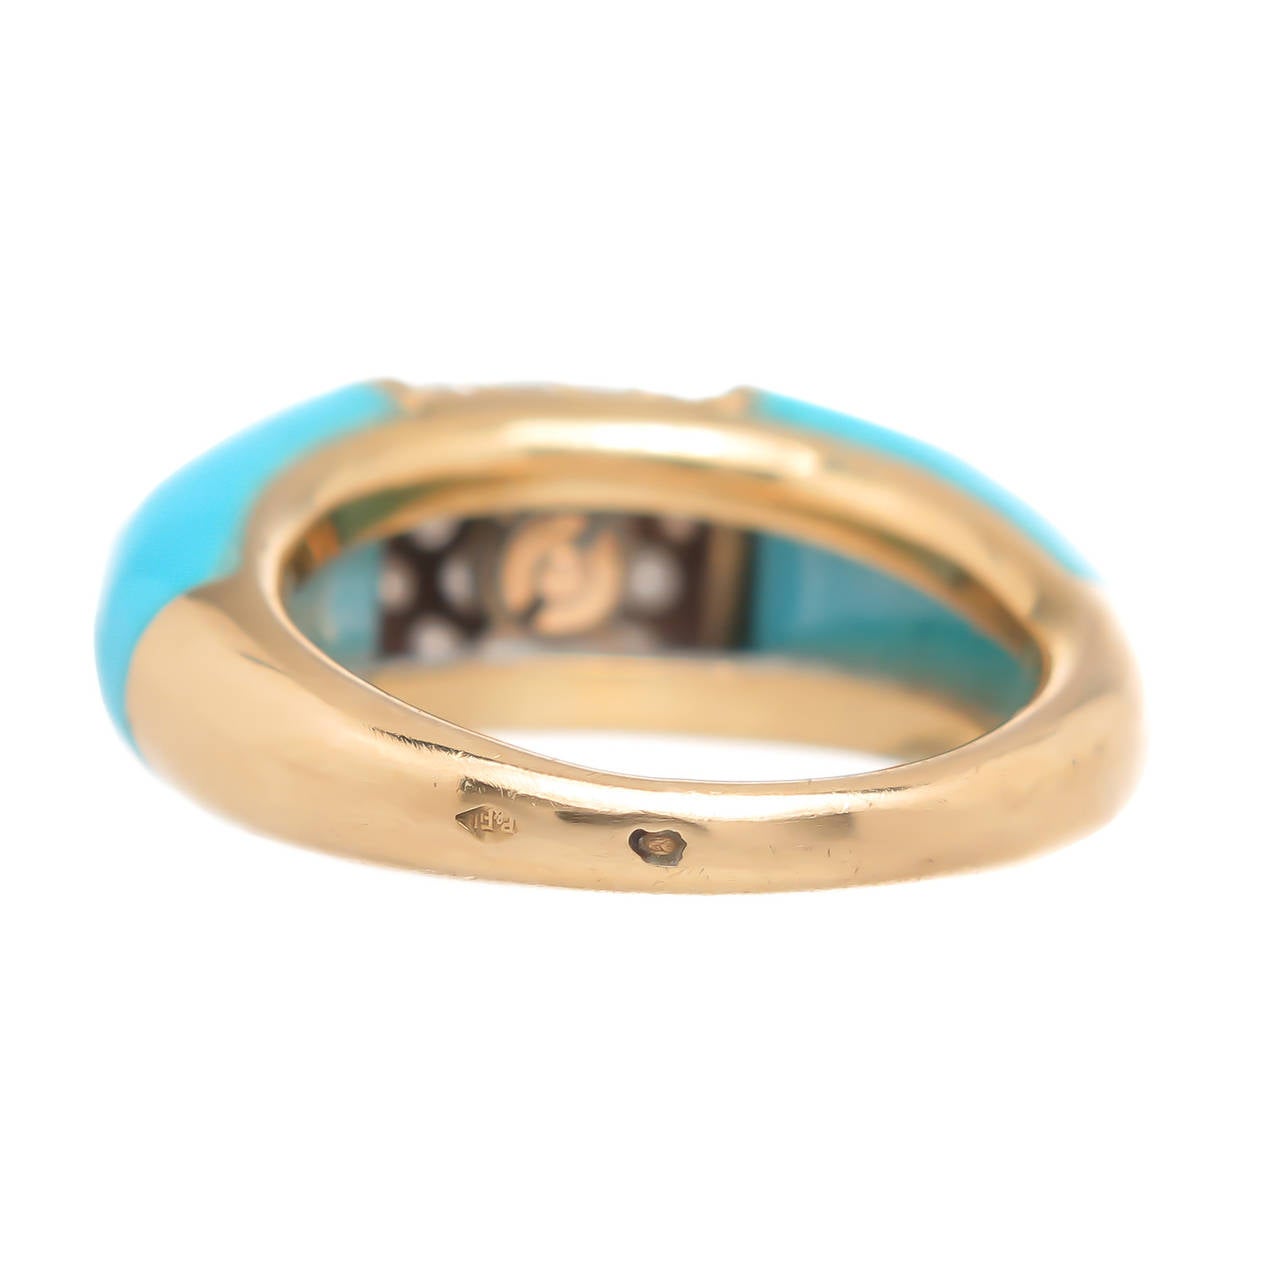 Van Cleef & Arpels Philippine Ring, 18K Yellow Gold and Persian Turquoise. Centrally set with 27 Fine White Diamonds totaling 1 Carat. Signed, Numbered and Having French Hall Marks. Finger Size = 6 1/2